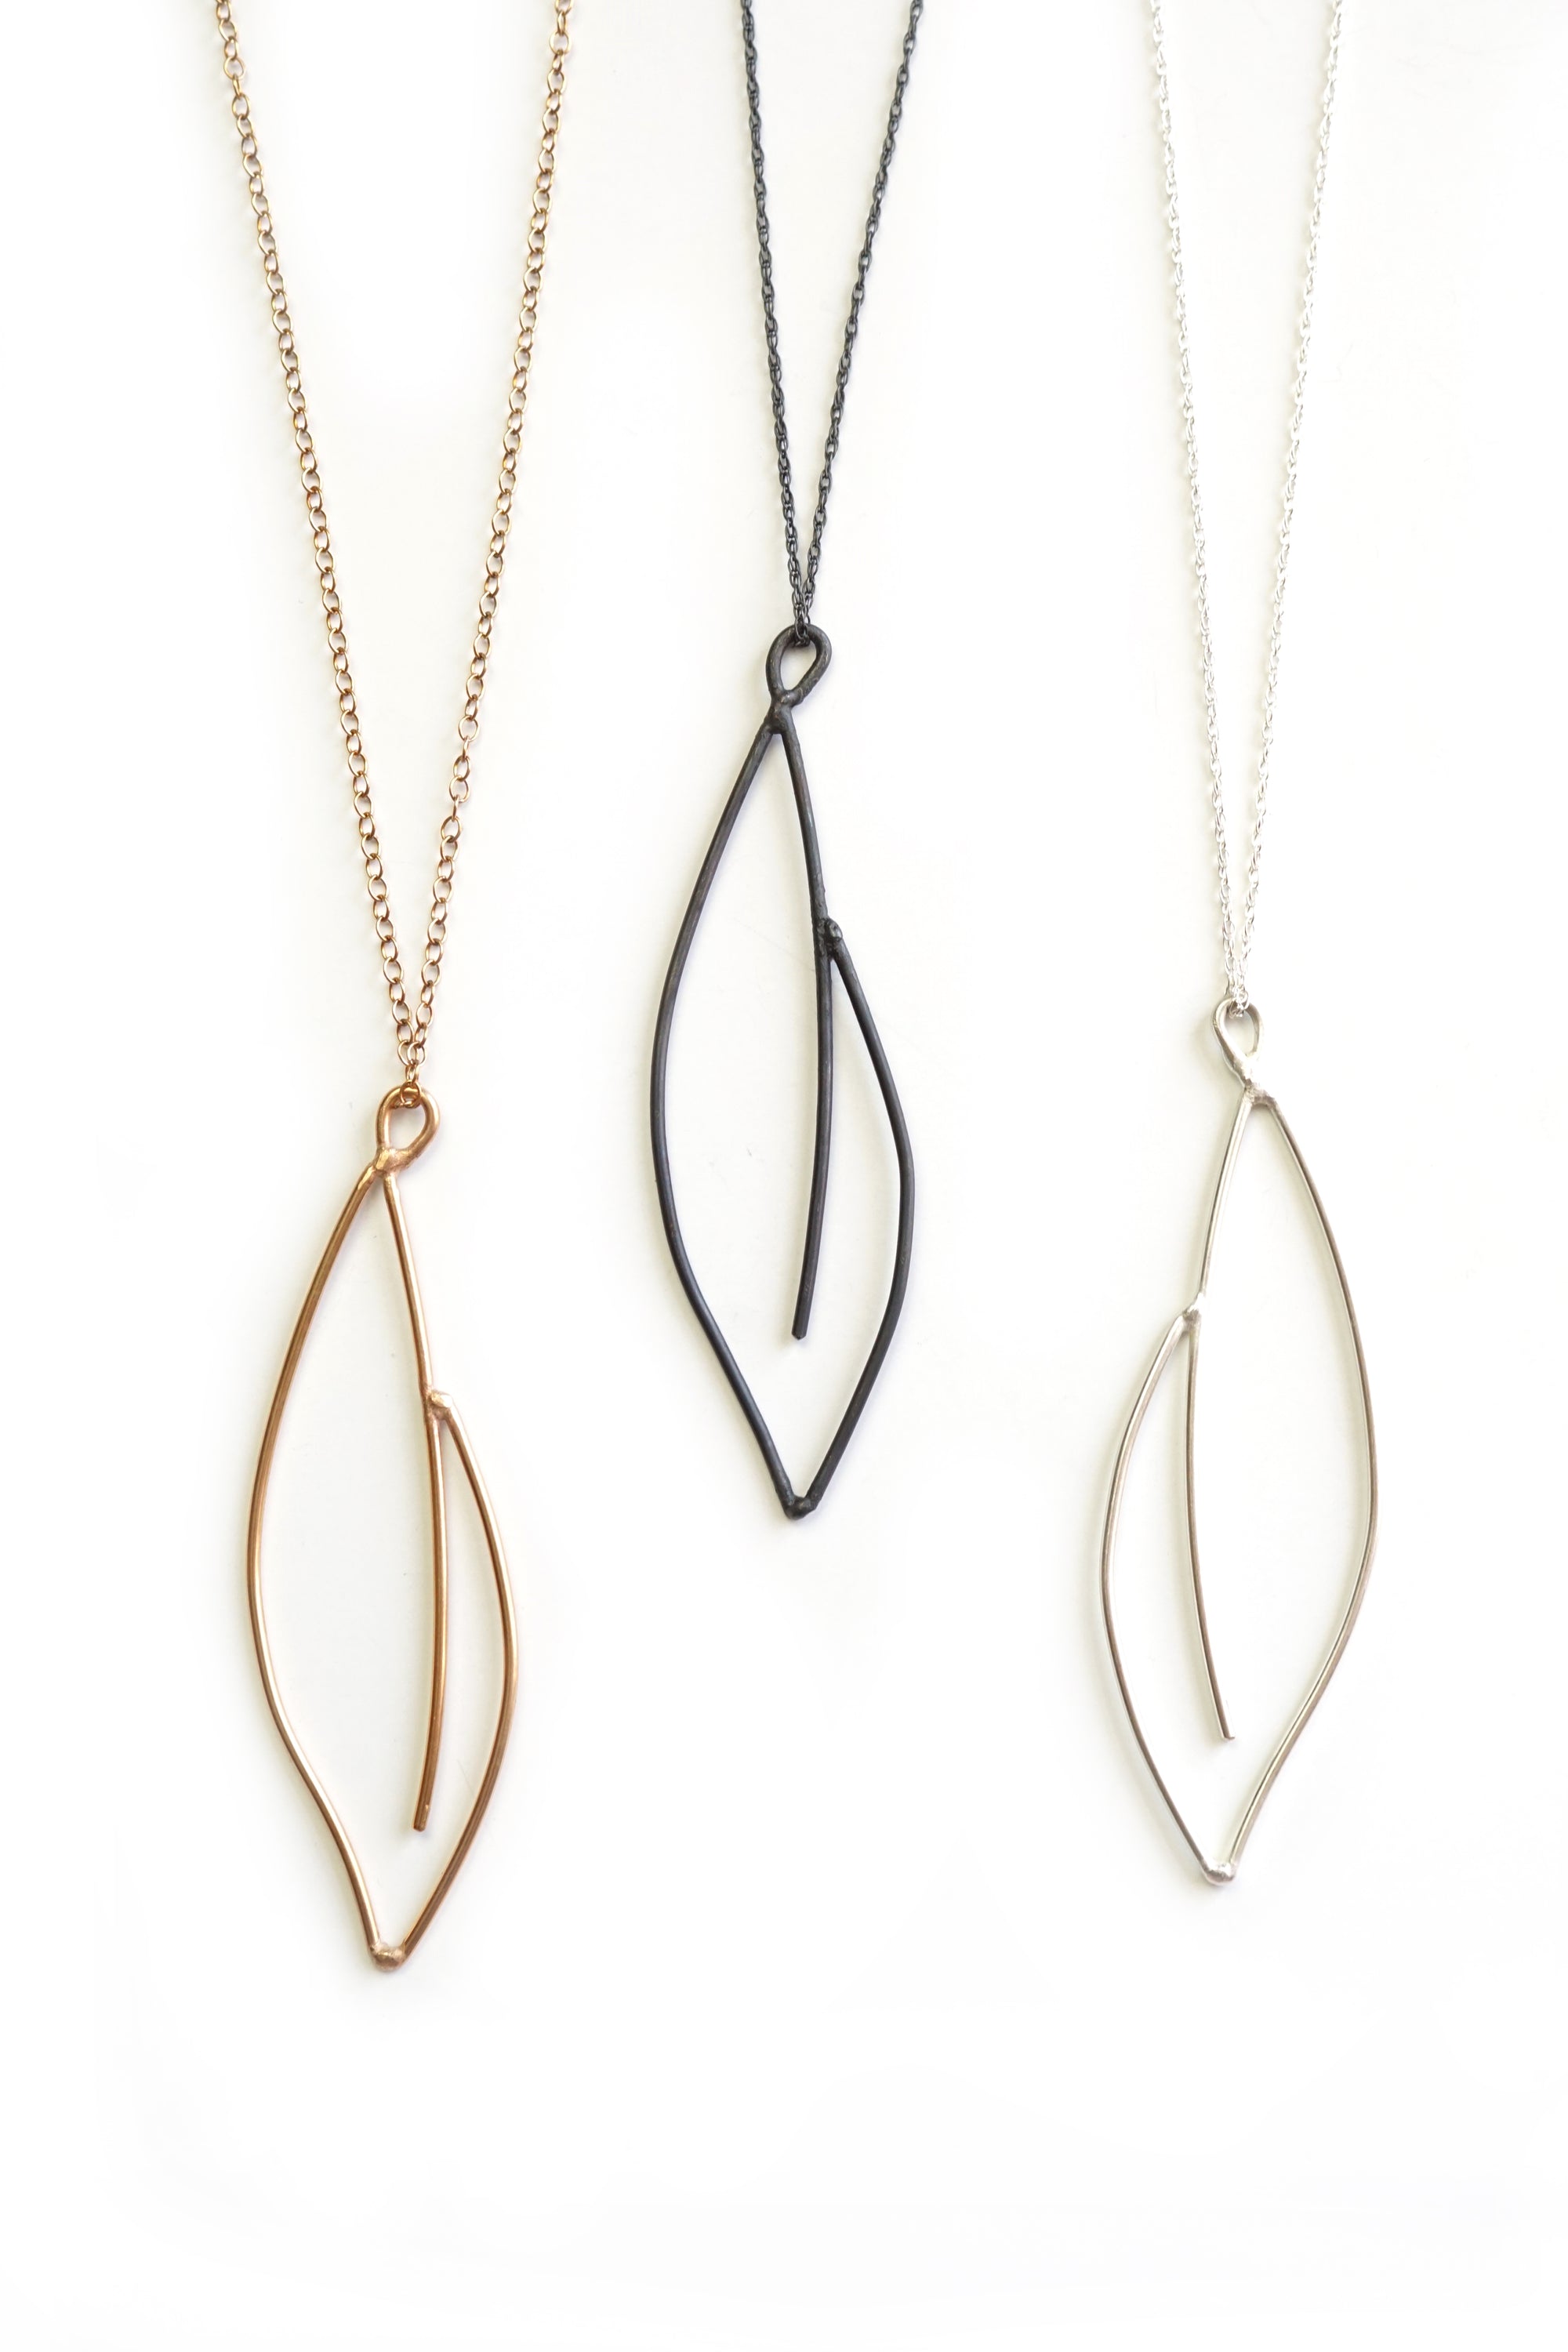 Verdant long necklace in black steel, silver, or bronze